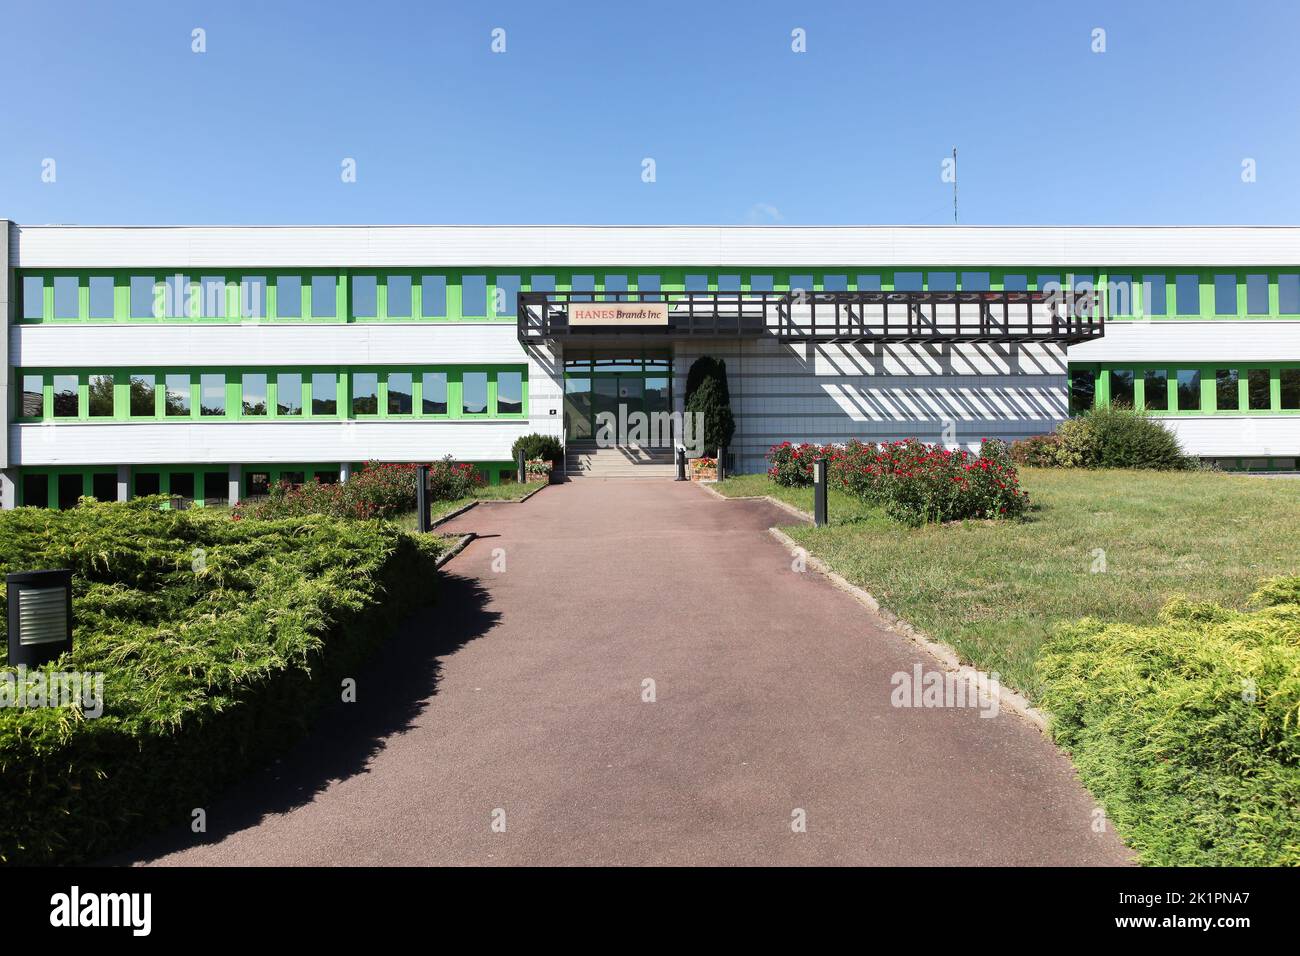 Autun, France - July 5, 2020: Hanesbrands inc and Dim office building in Autun, France Stock Photo